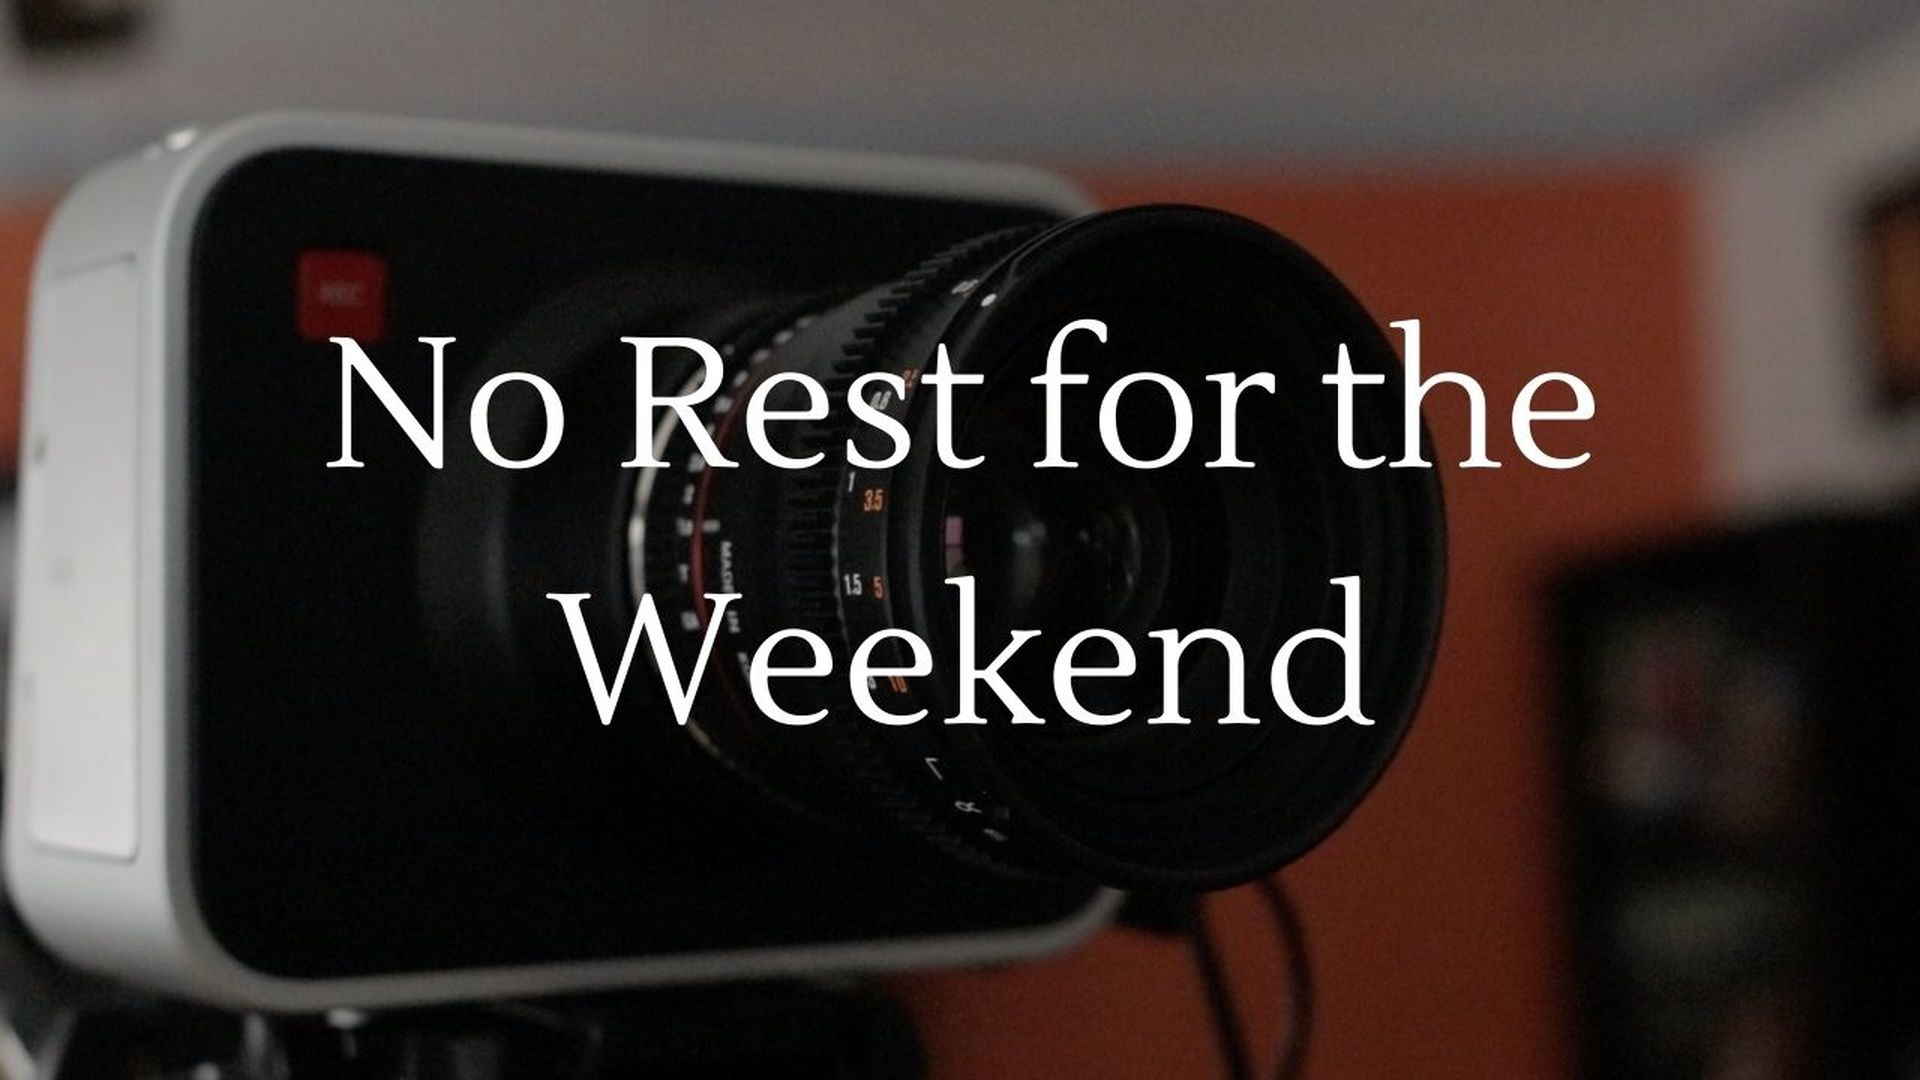 No Rest for the Weekend Trailer